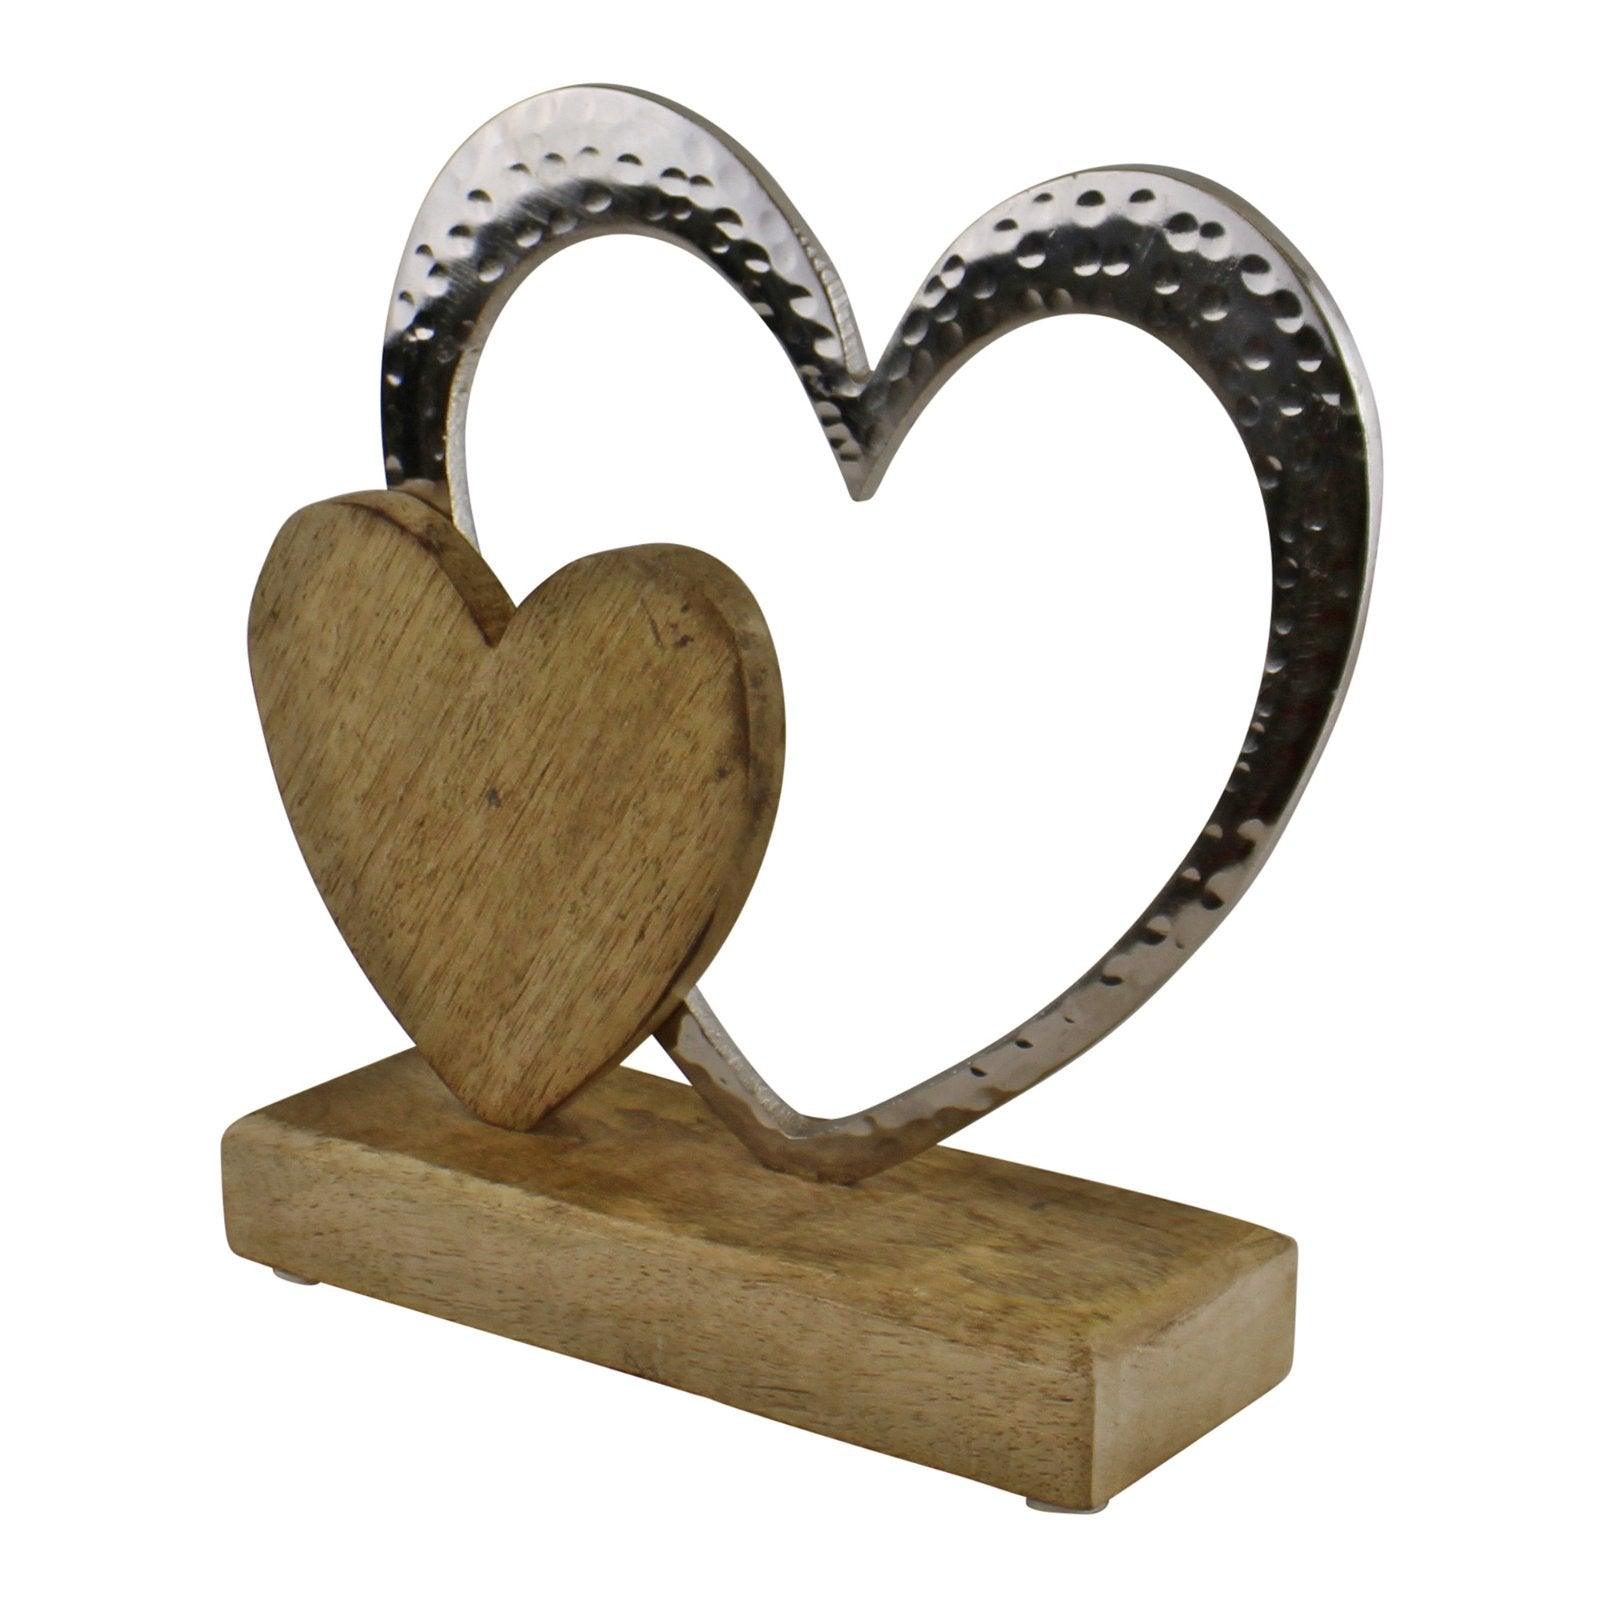 View Large Double Heart On Wooden Base Ornament information